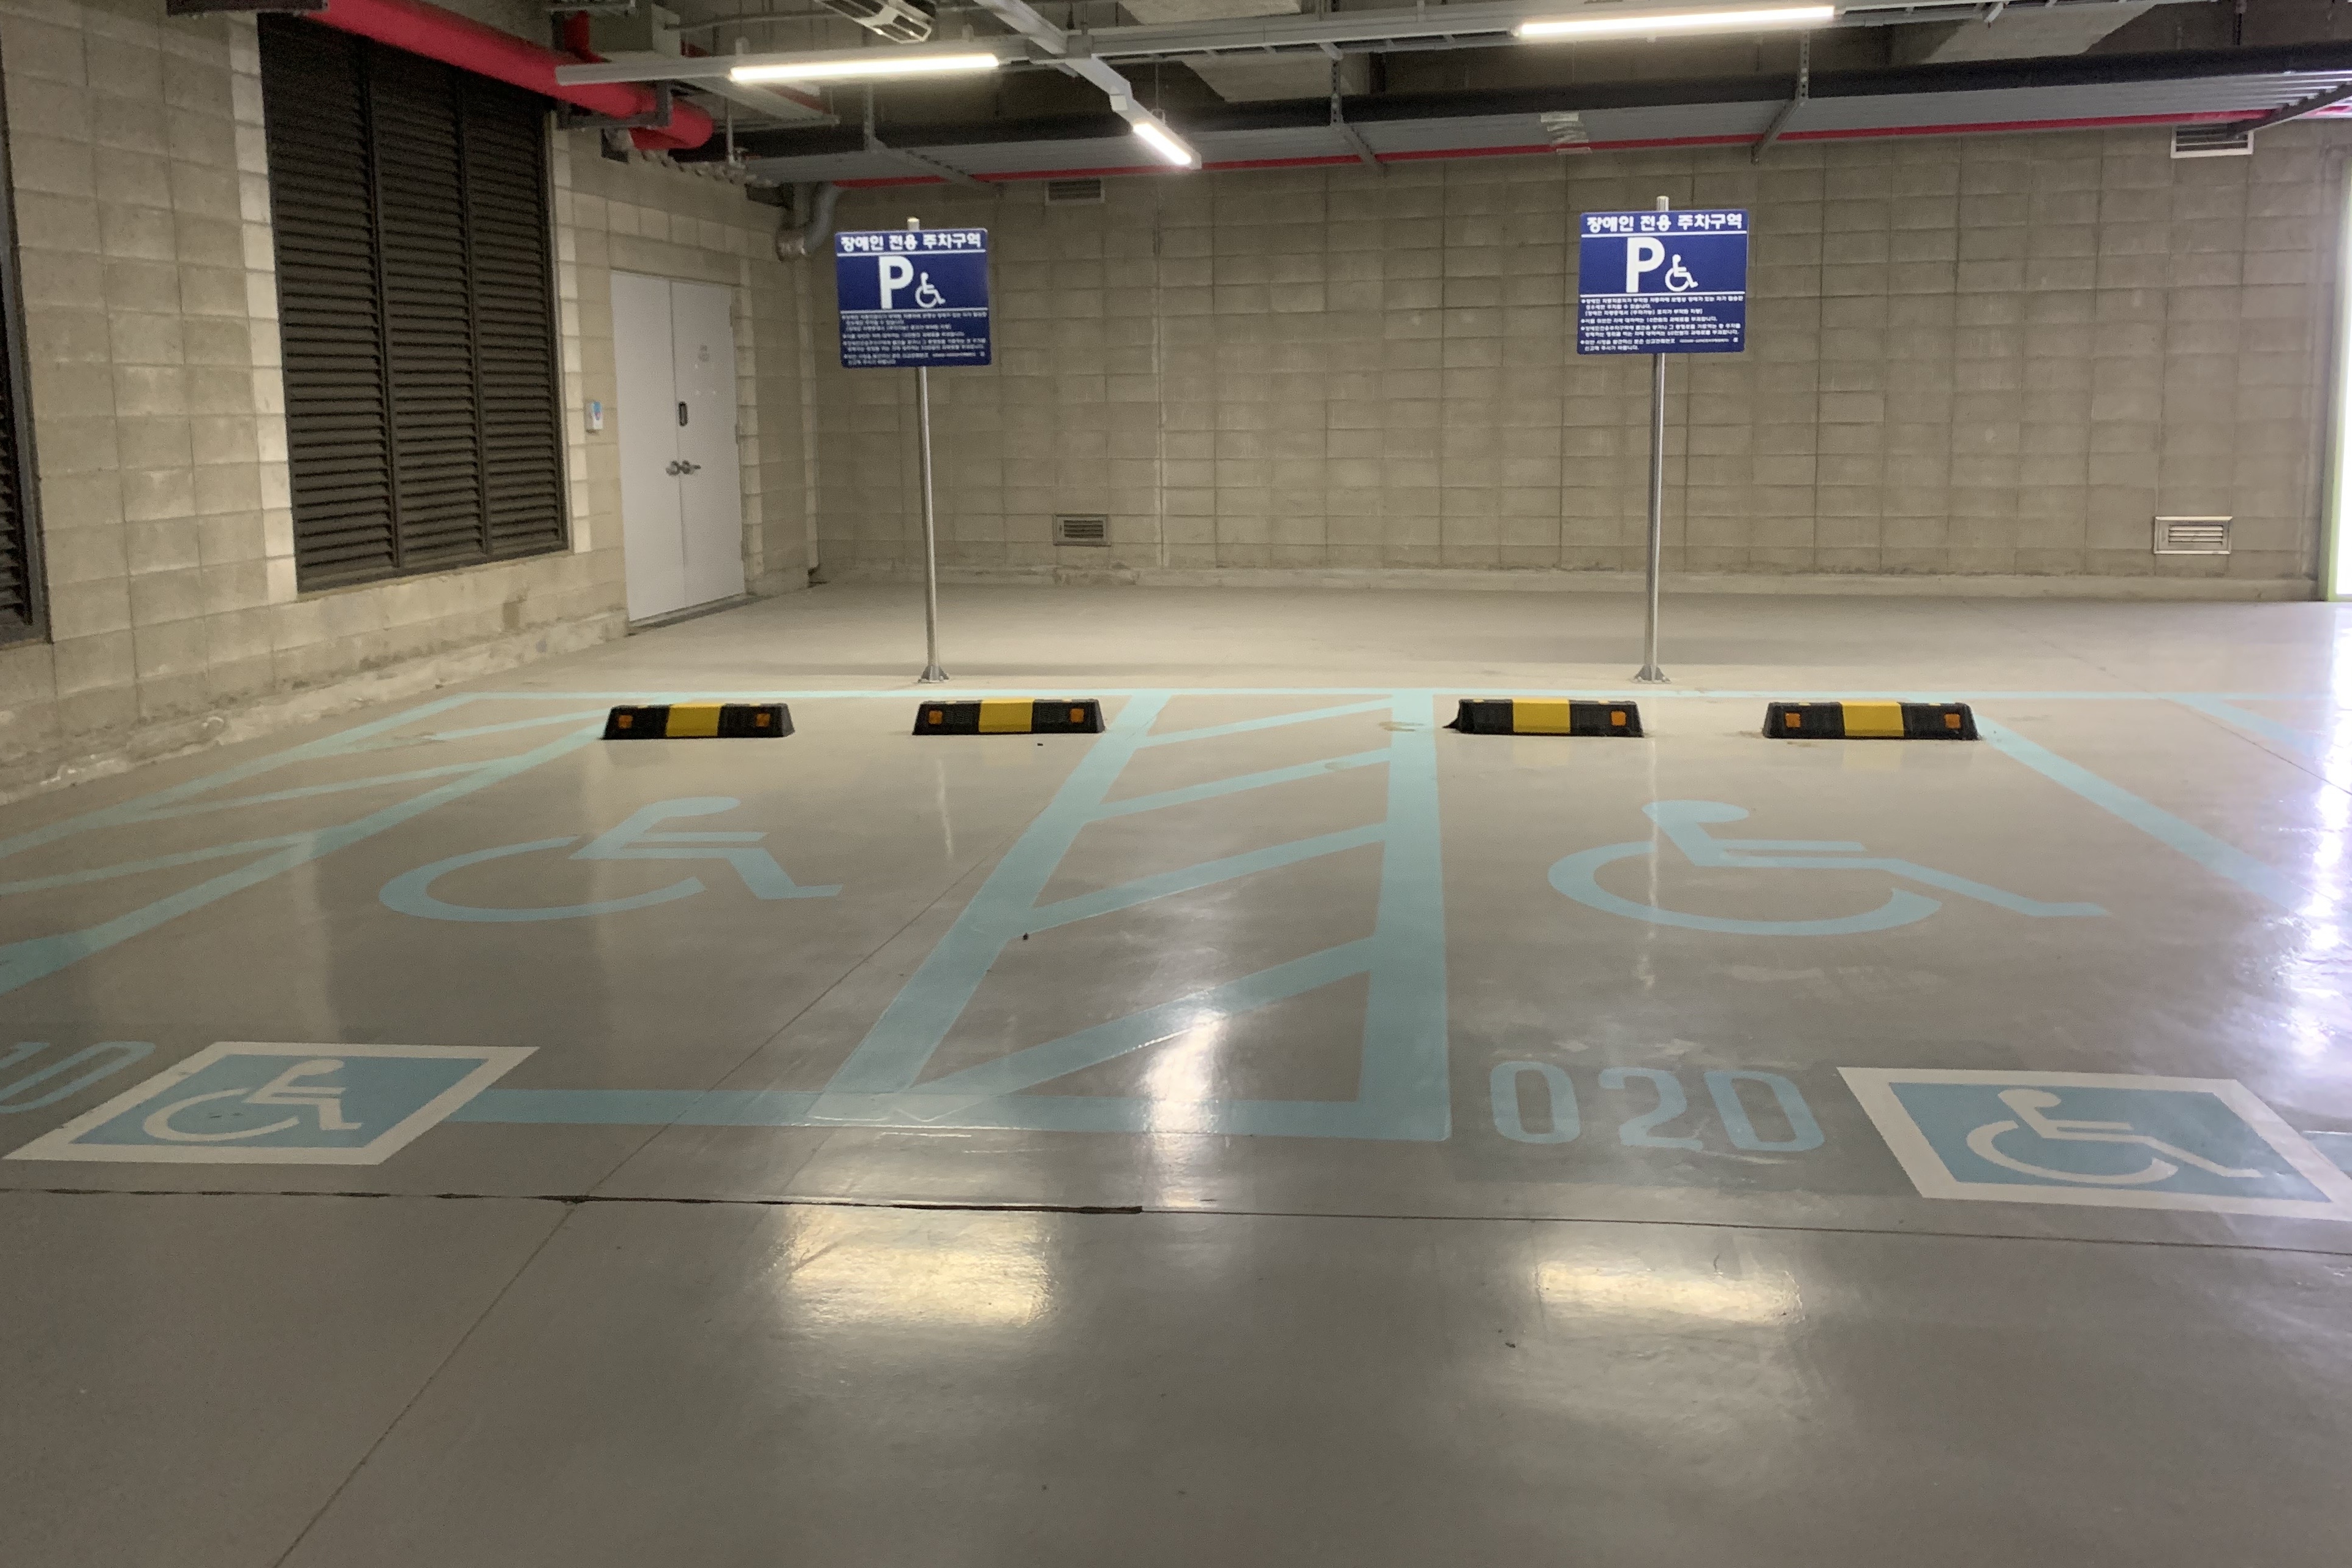 Parking lots 0 : Accessible parking lots located in the underground parking zone
